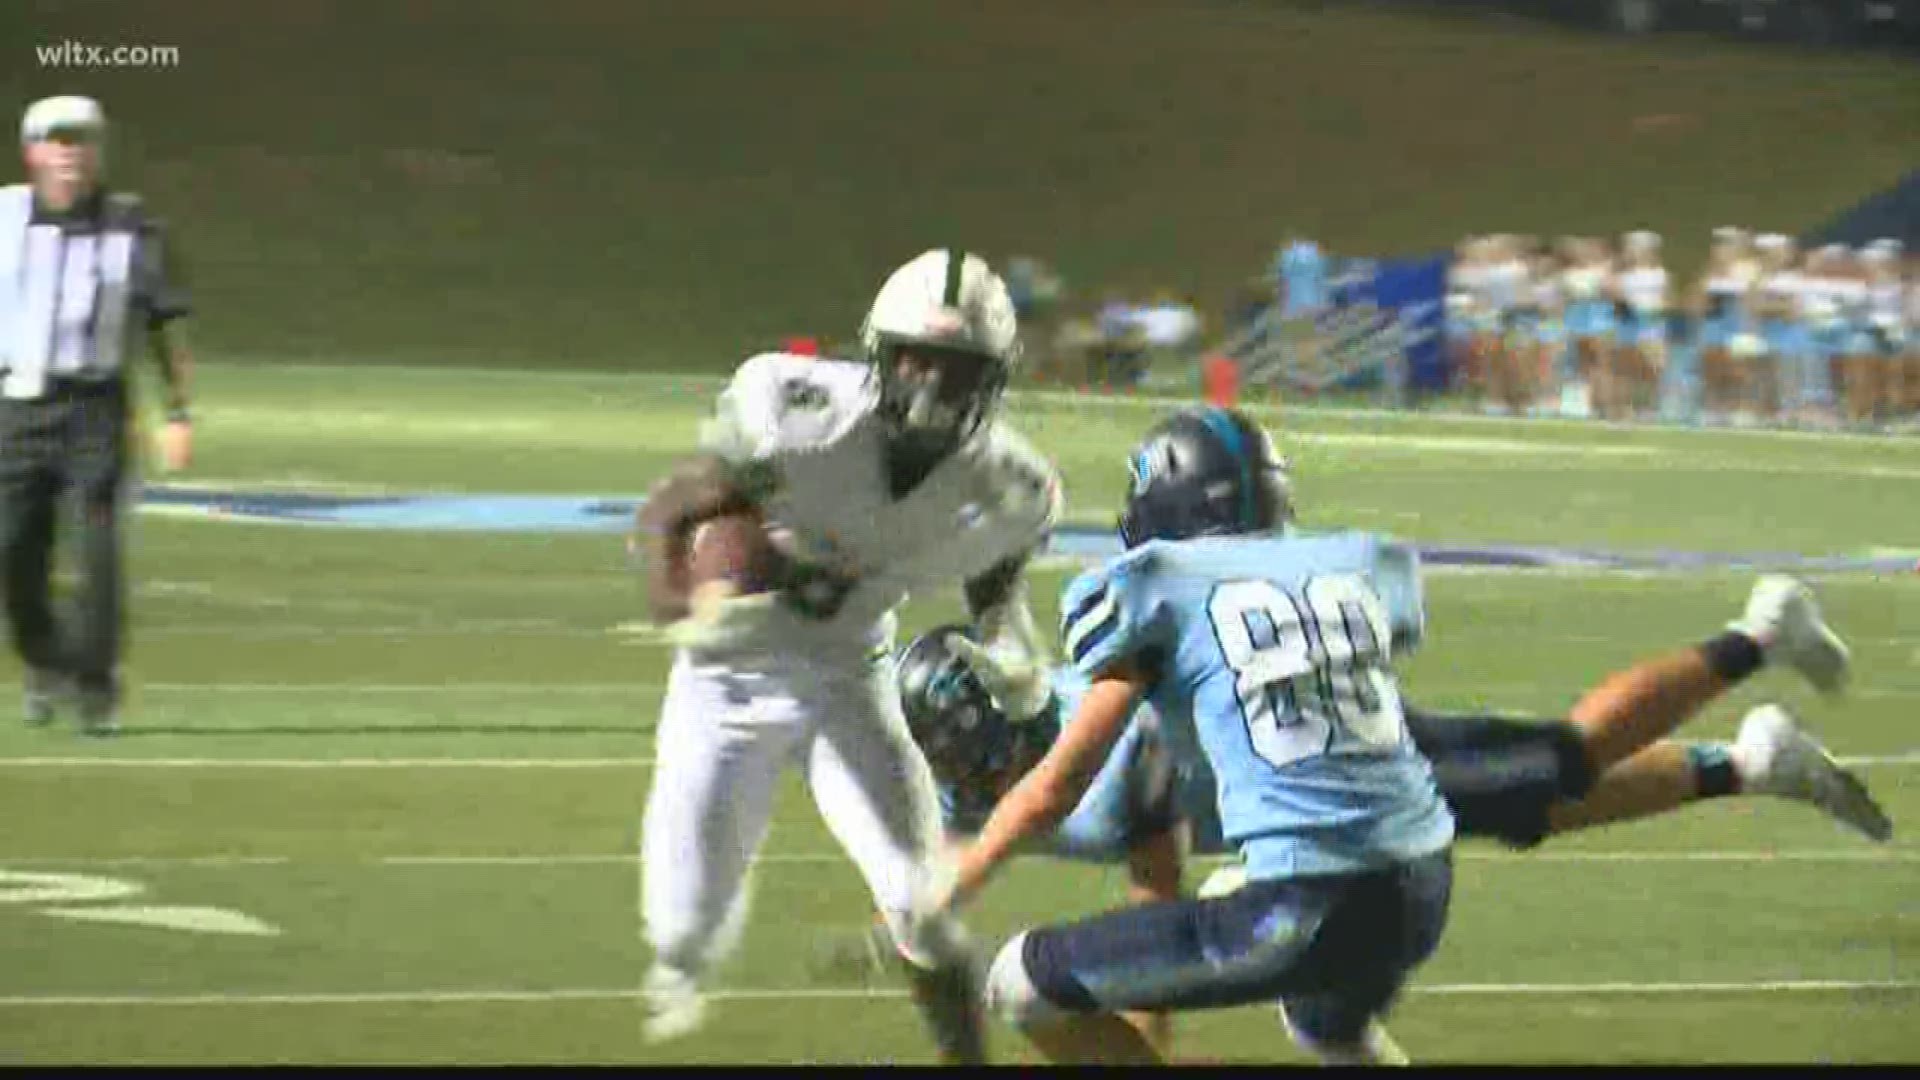 Highlights and scores from Midlands area high school football games on October 4. (Part 1 of 2)